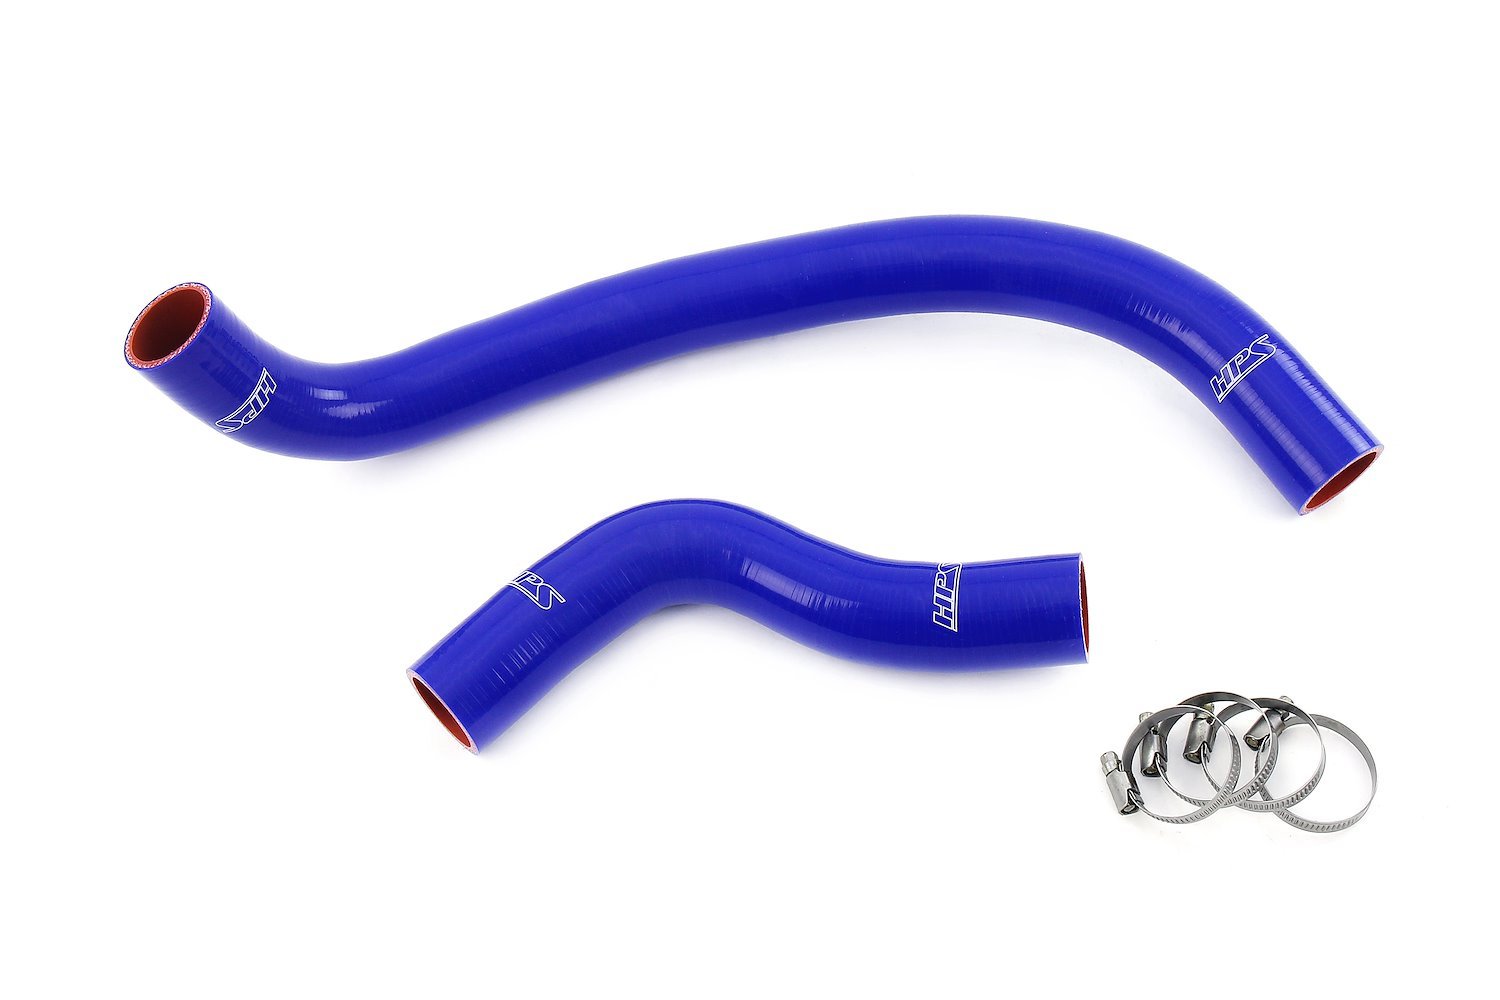 57-2096-BLUE Radiator Hose Kit, 3-Ply Reinforced Silicone, Replaces Rubber Radiator Coolant Hoses